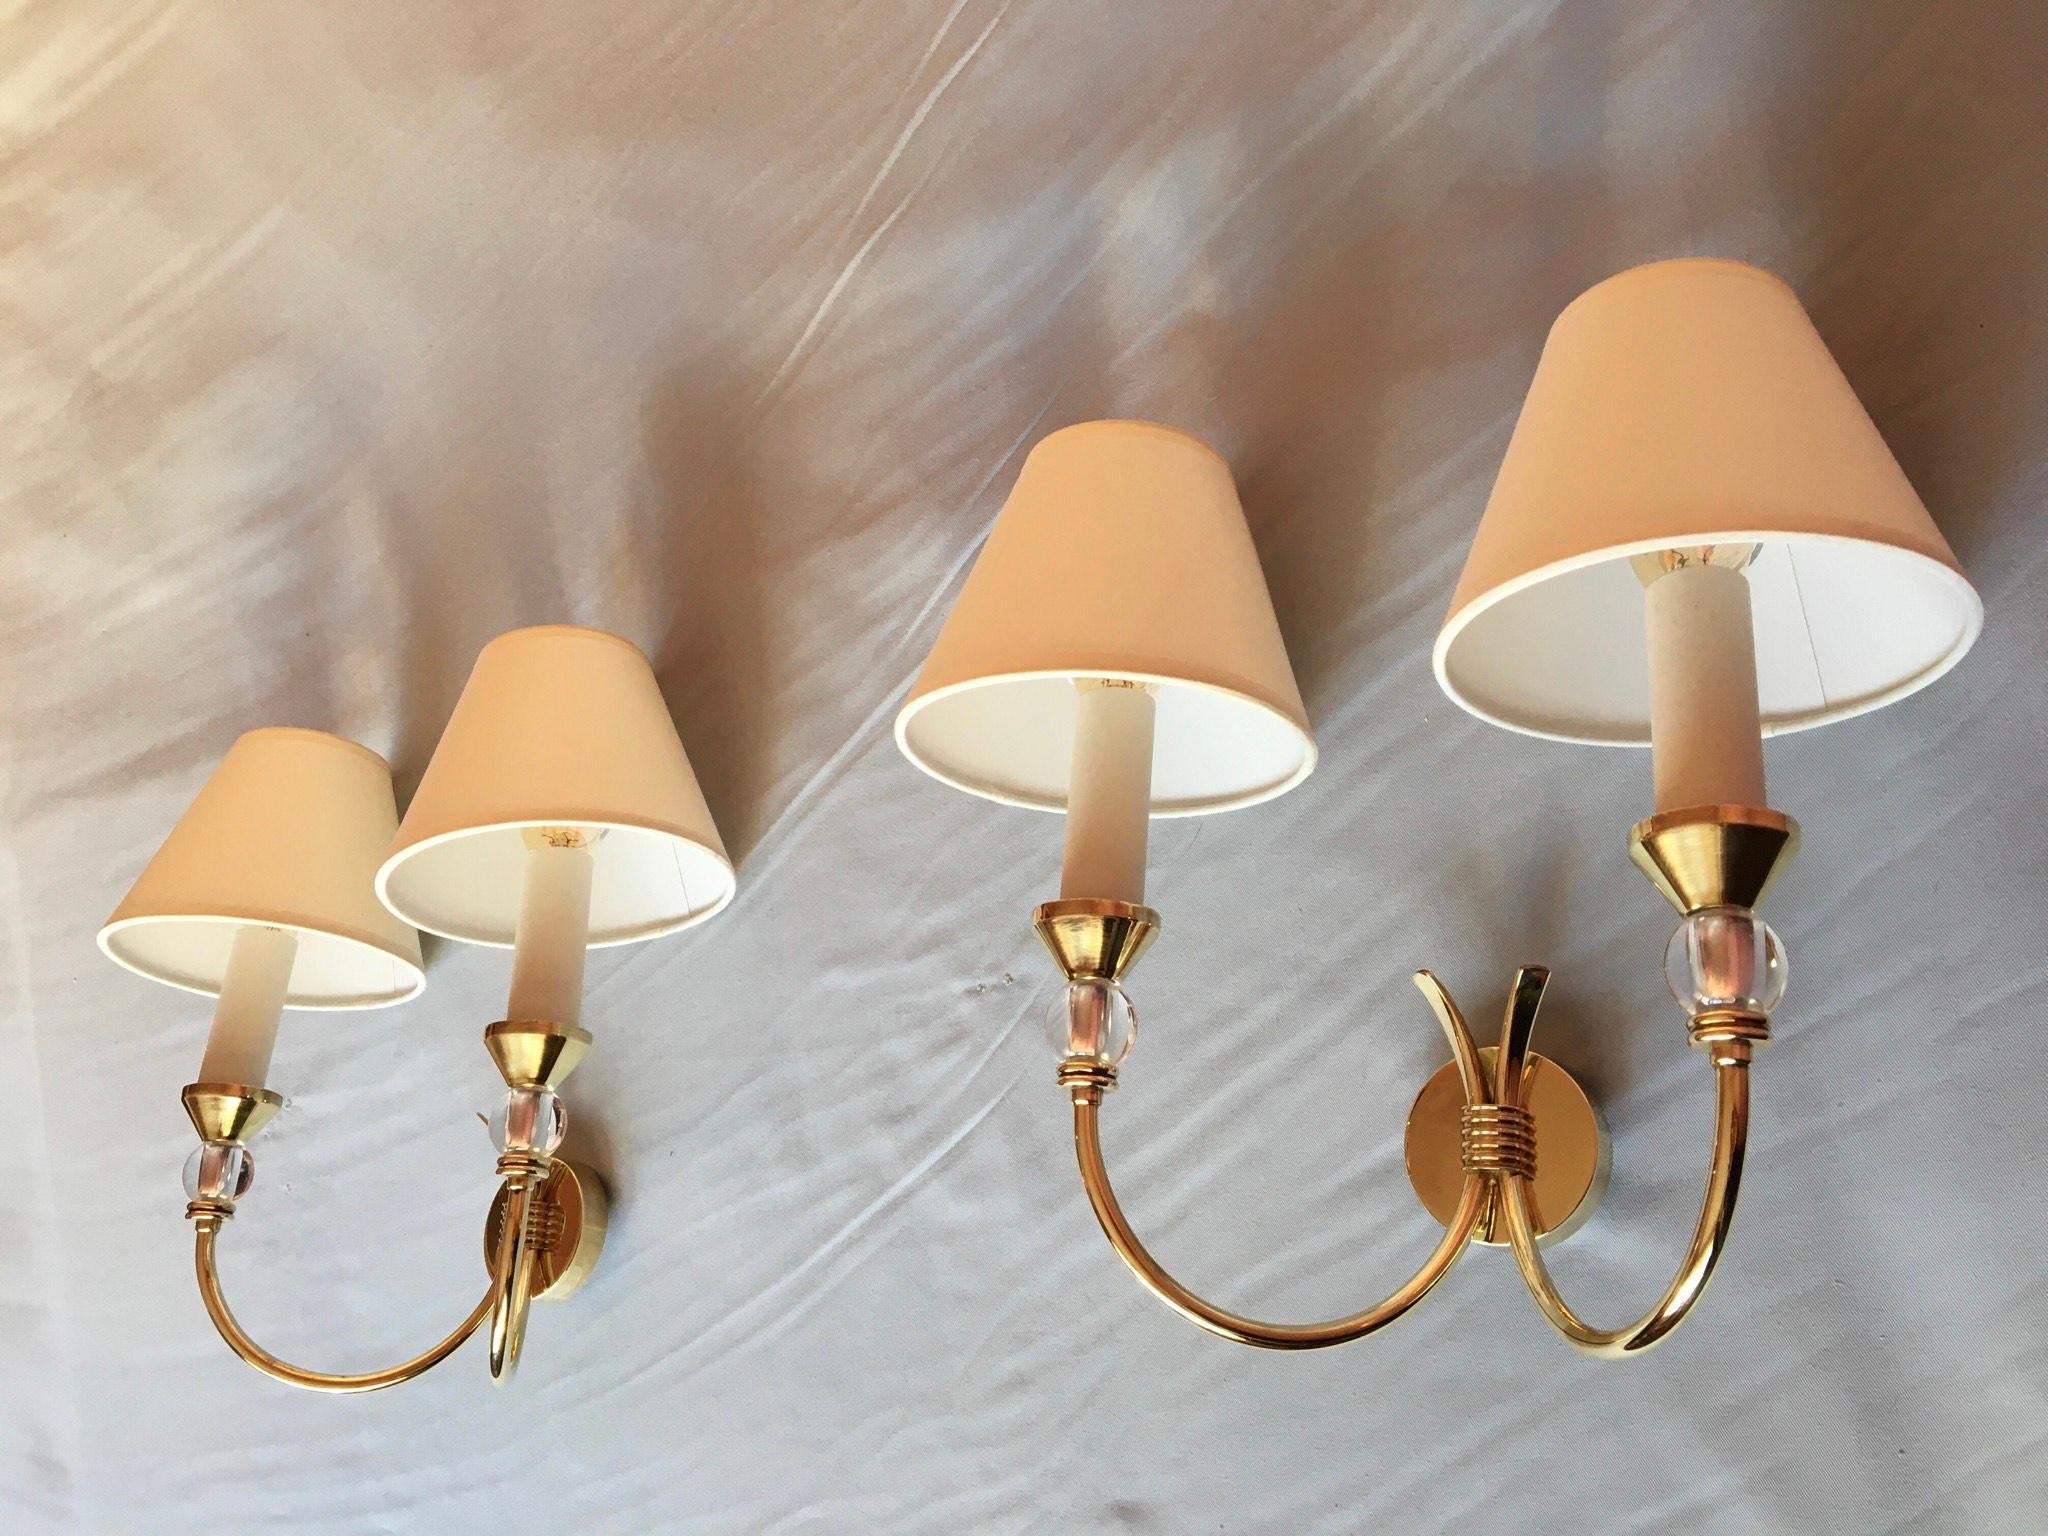 Mid-20th Century Neoclassical Maison Jansen Style Brass Double Sconces, France, 1950 For Sale